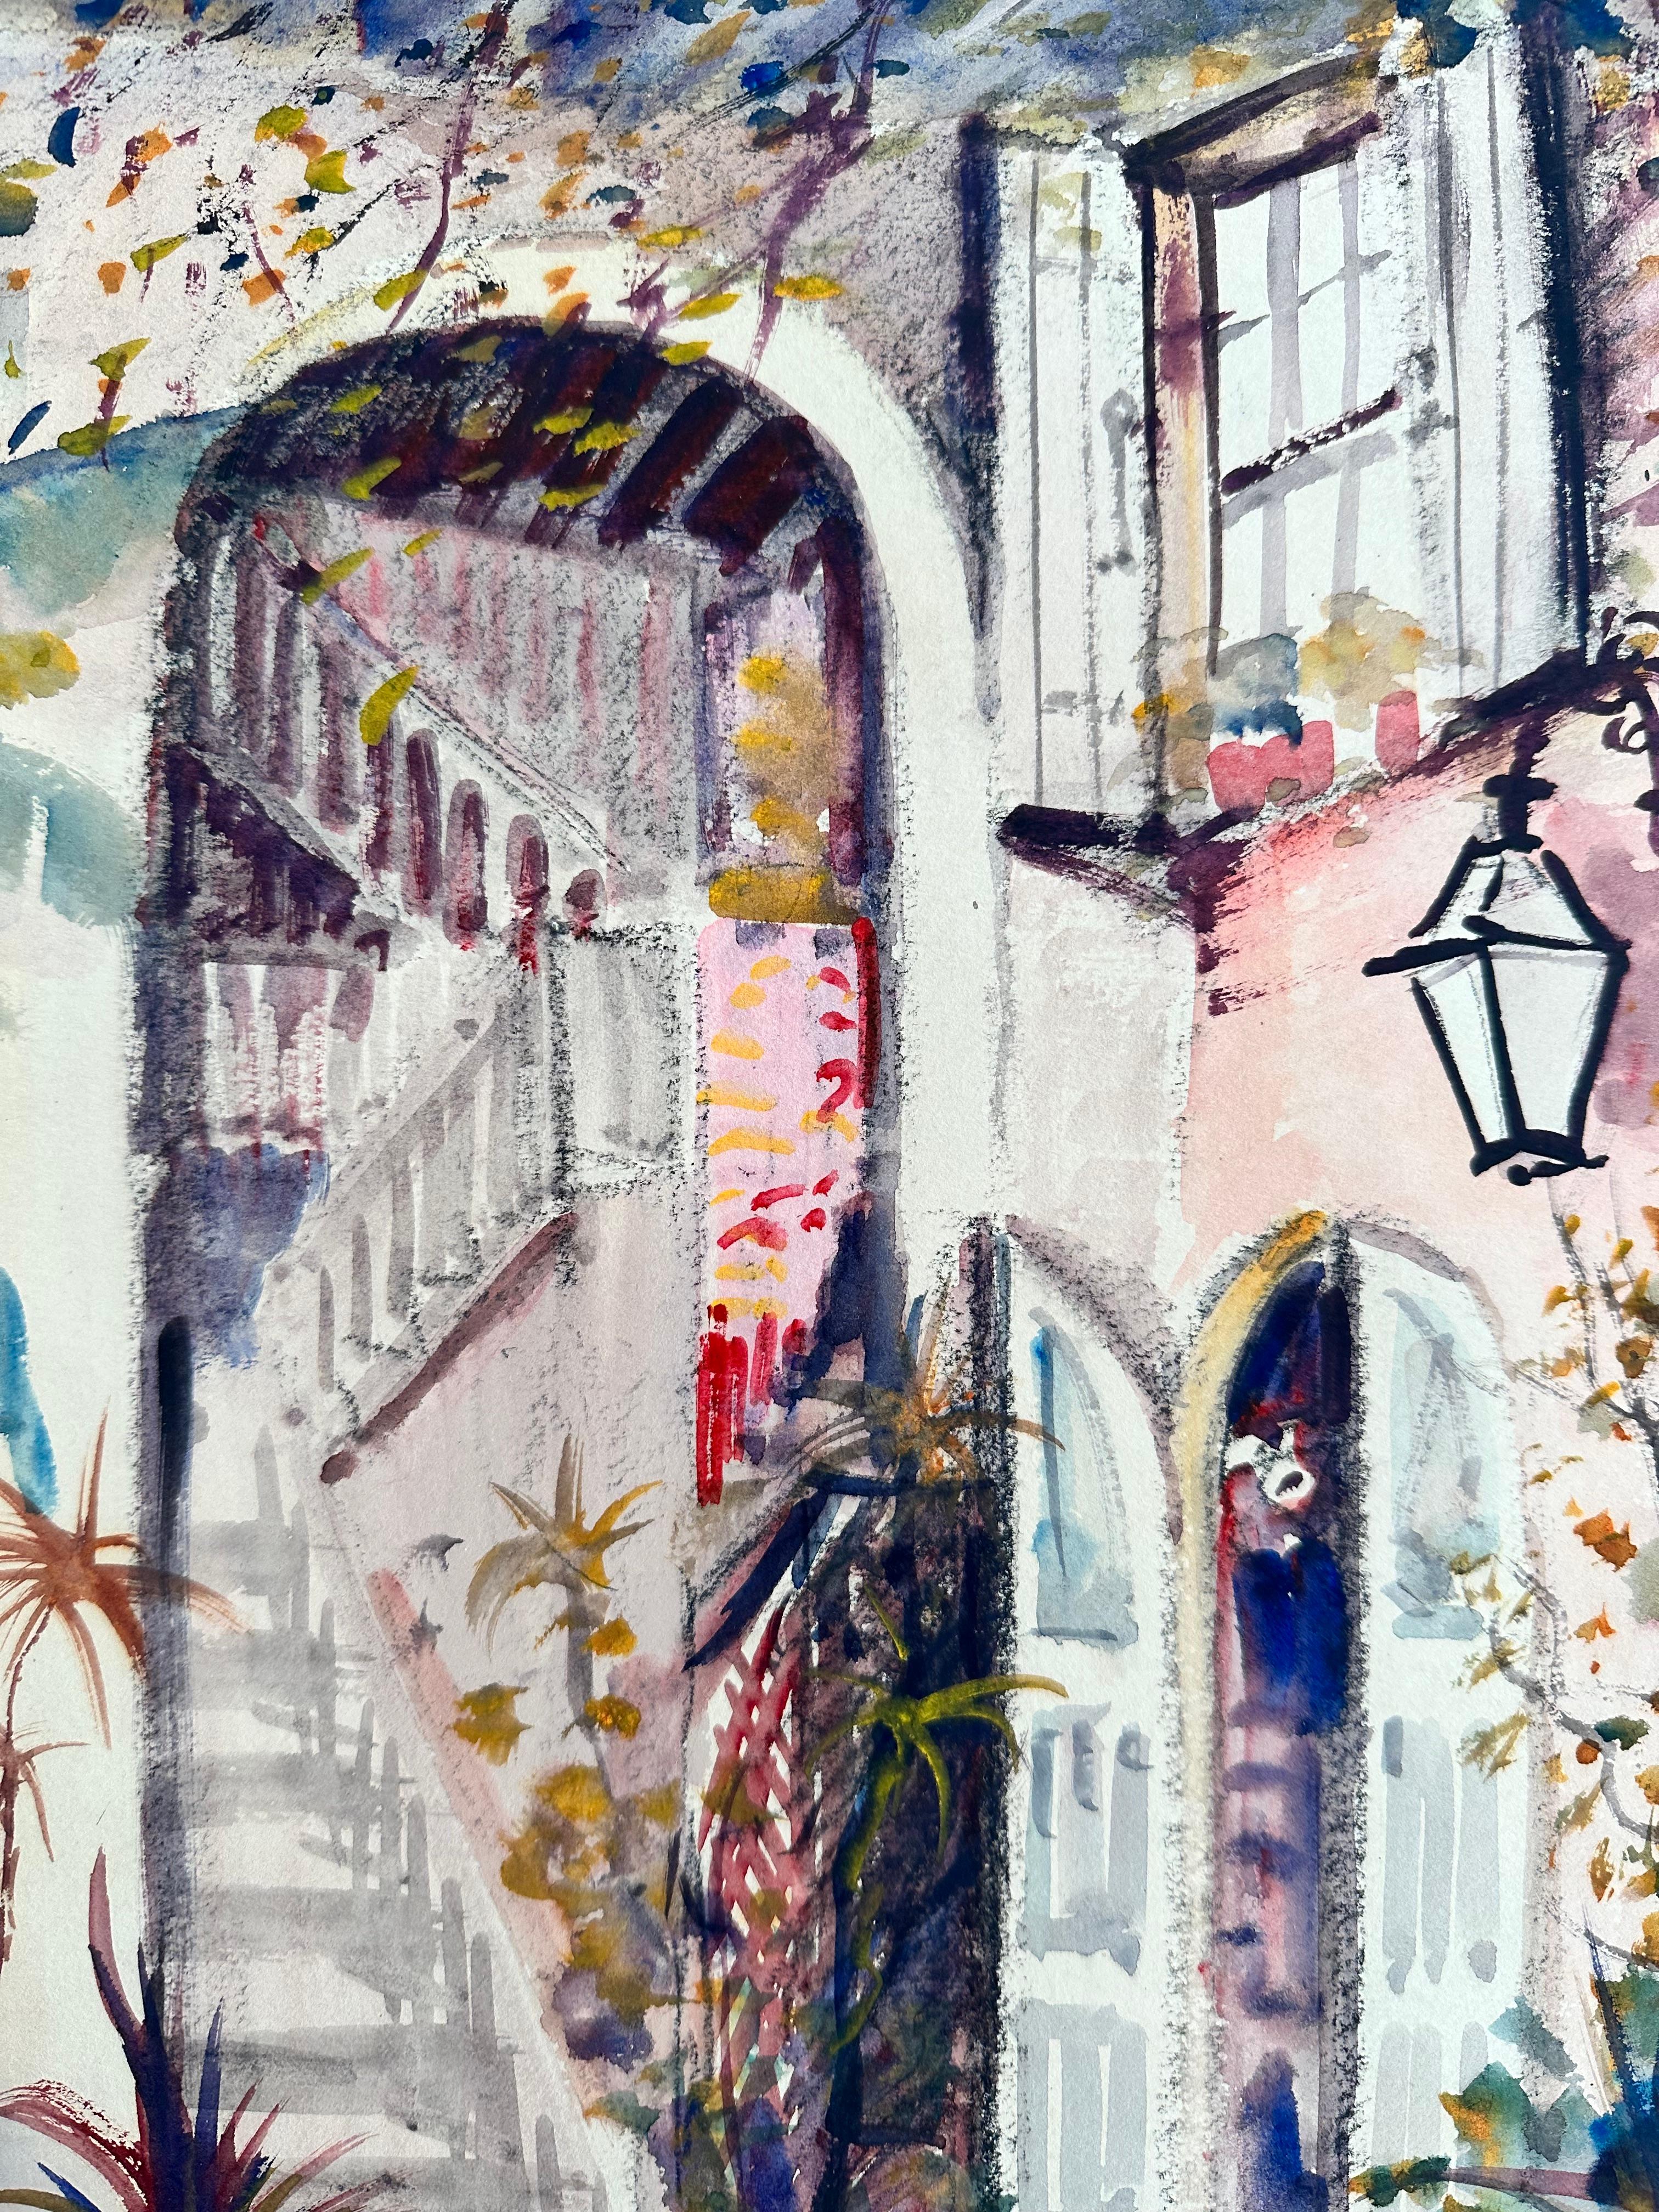 French Quarter, New Orleans - Painting by Nestor Fruge